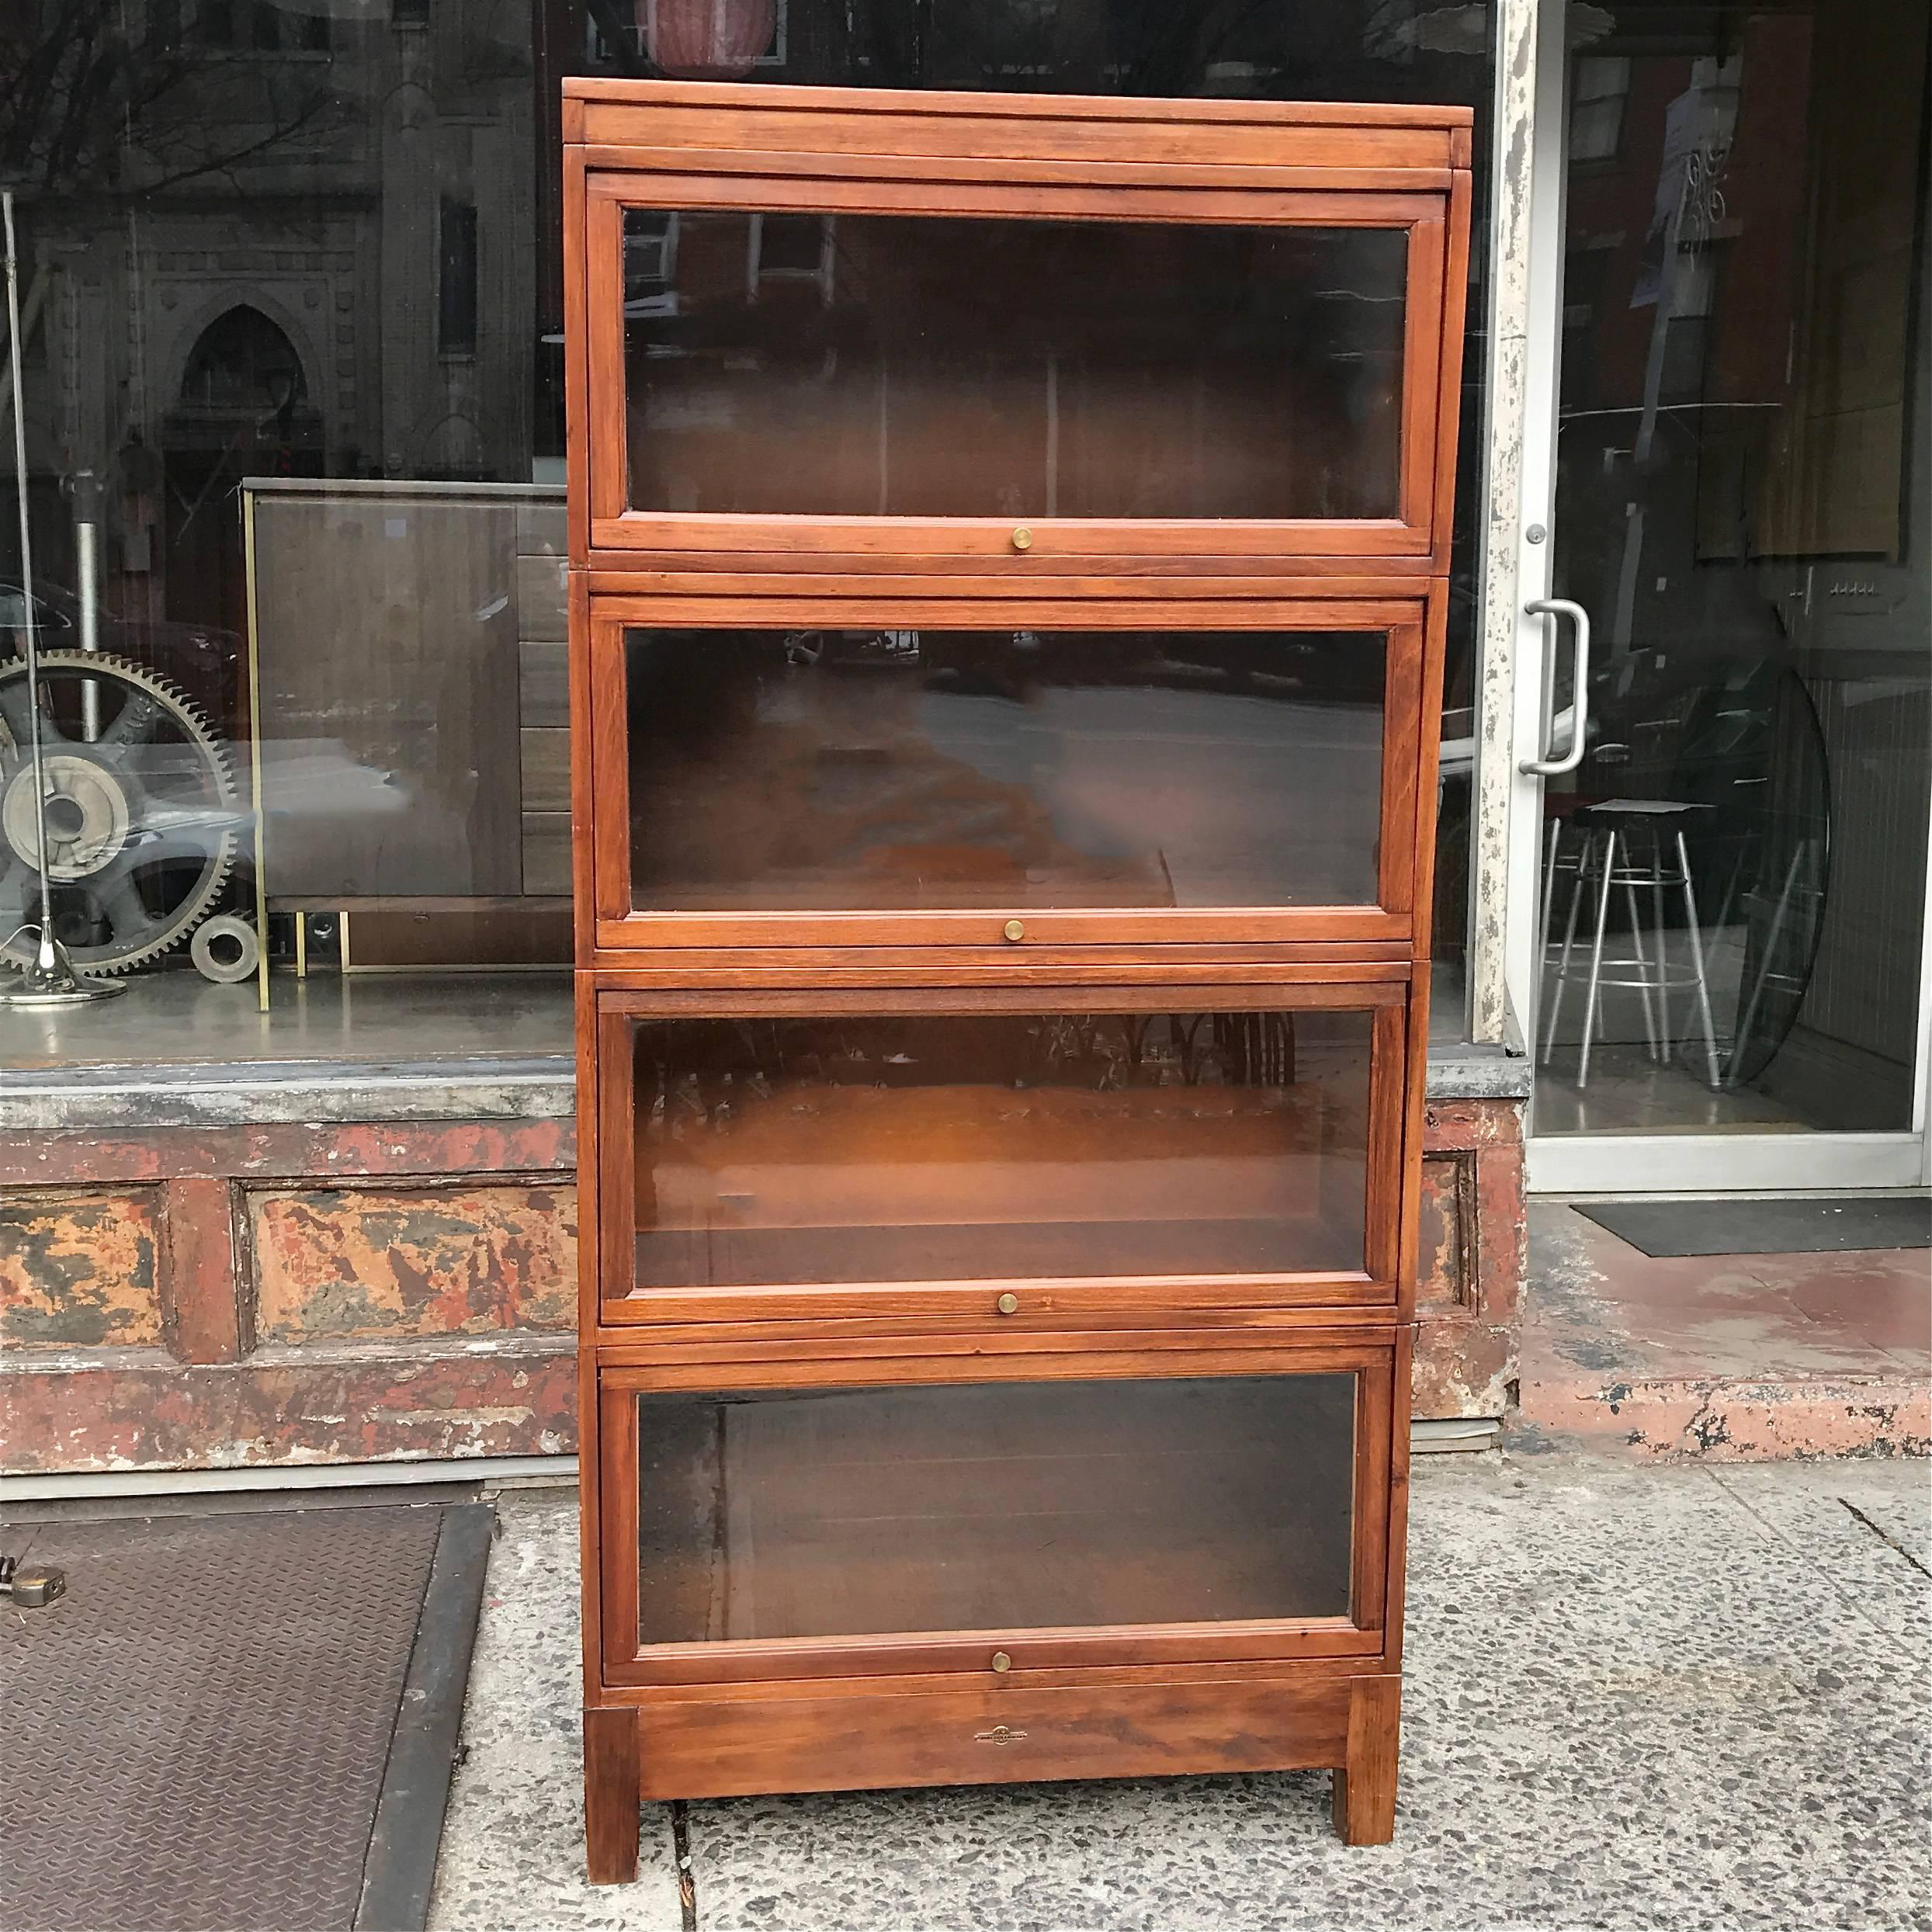 Classic, 1930s, cherry, barrister book case by Globe Wernicke is four stackable cases with brass pulls and glass door fronts that slide back into each case to open.